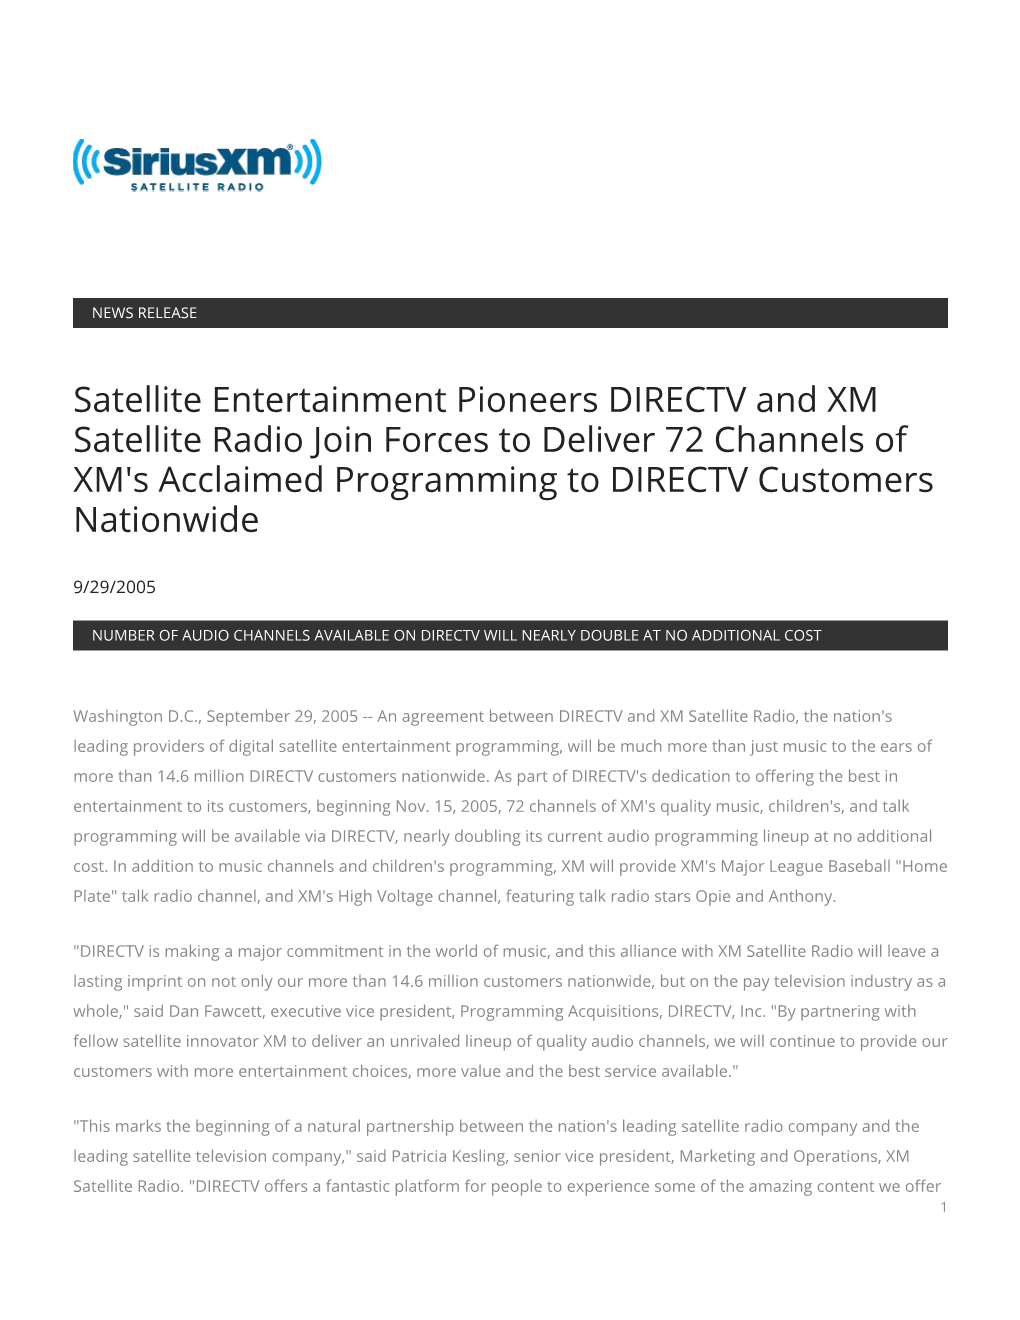 Satellite Entertainment Pioneers DIRECTV and XM Satellite Radio Join Forces to Deliver 72 Channels of XM's Acclaimed Programming to DIRECTV Customers Nationwide